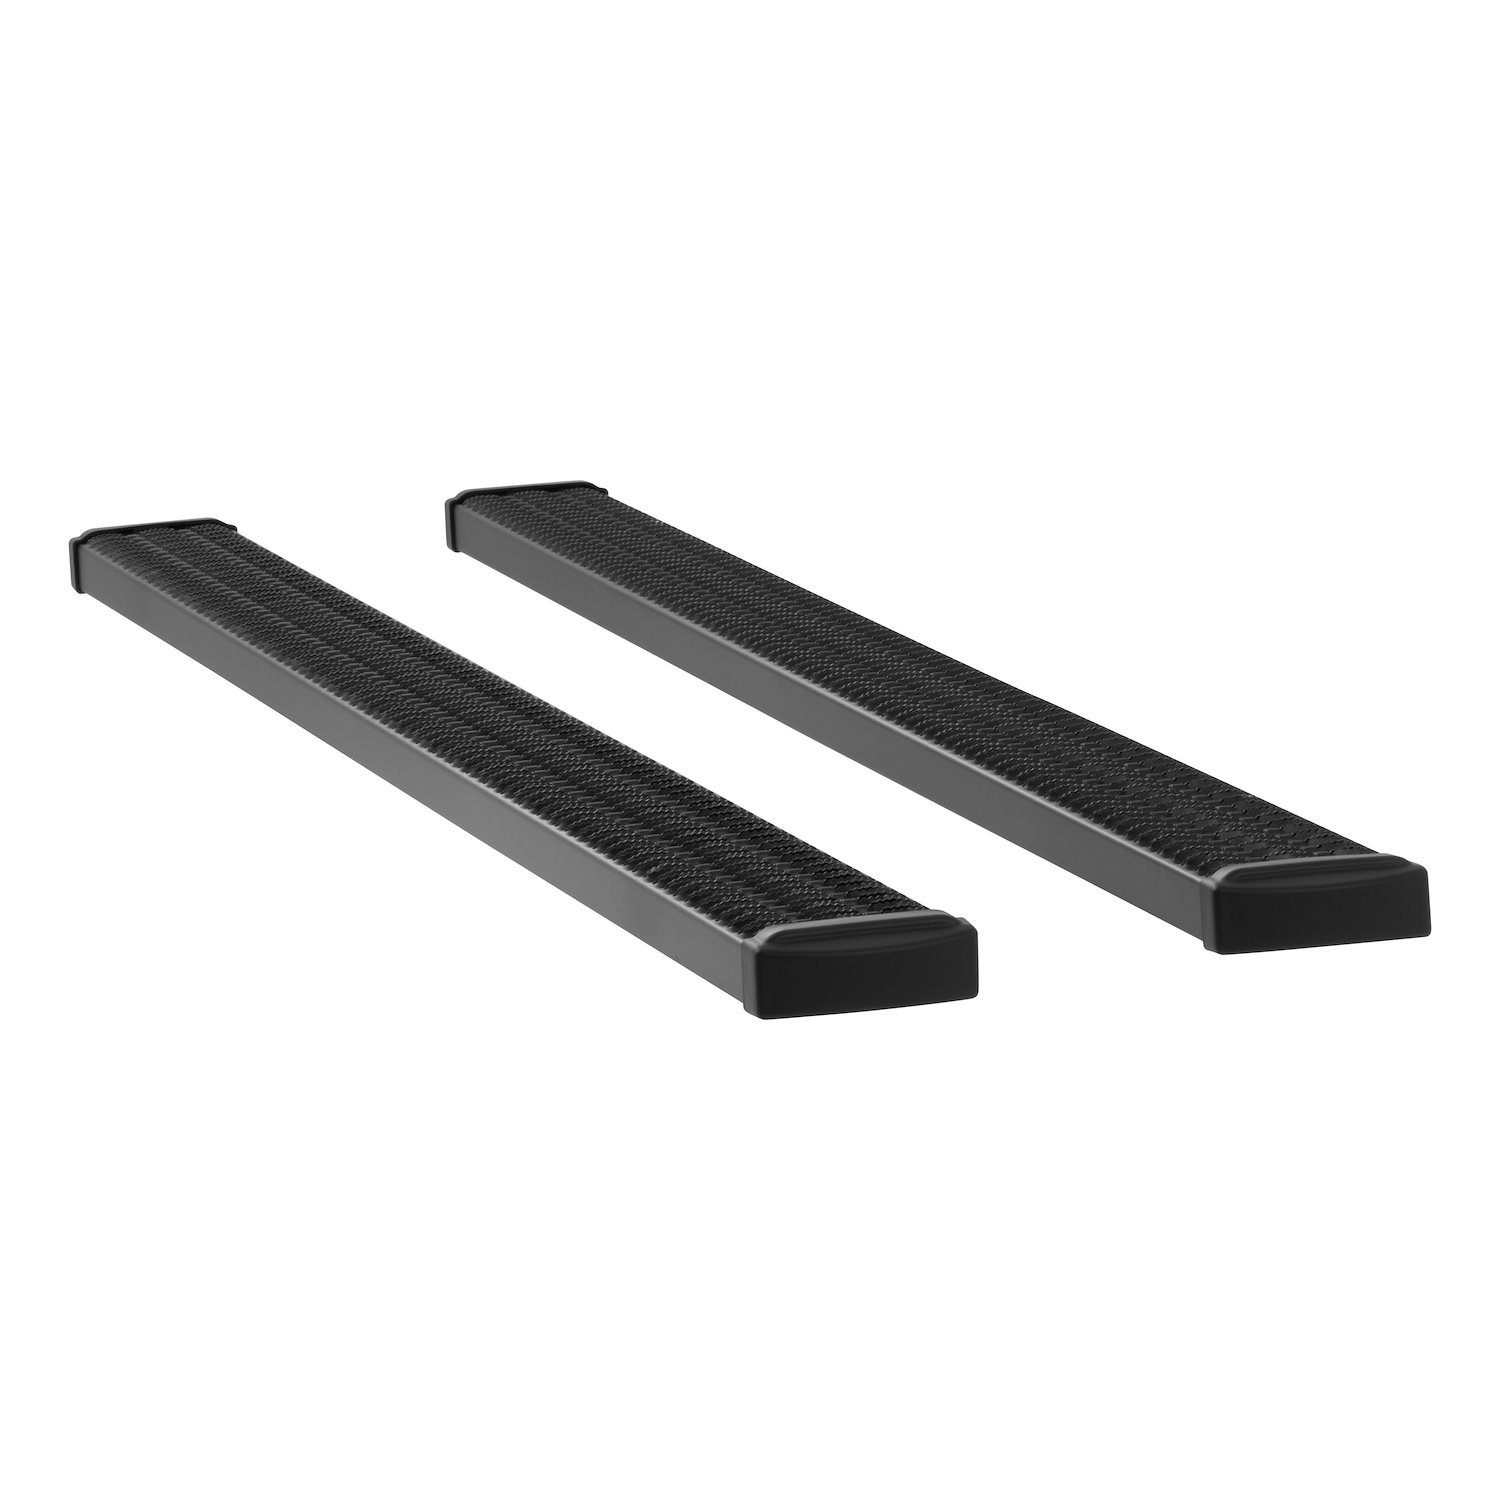 415098-400939 Grip Step 7 in. x 98 in. Aluminum W2W Running Boards Fits Select Dodge, Ram 1500